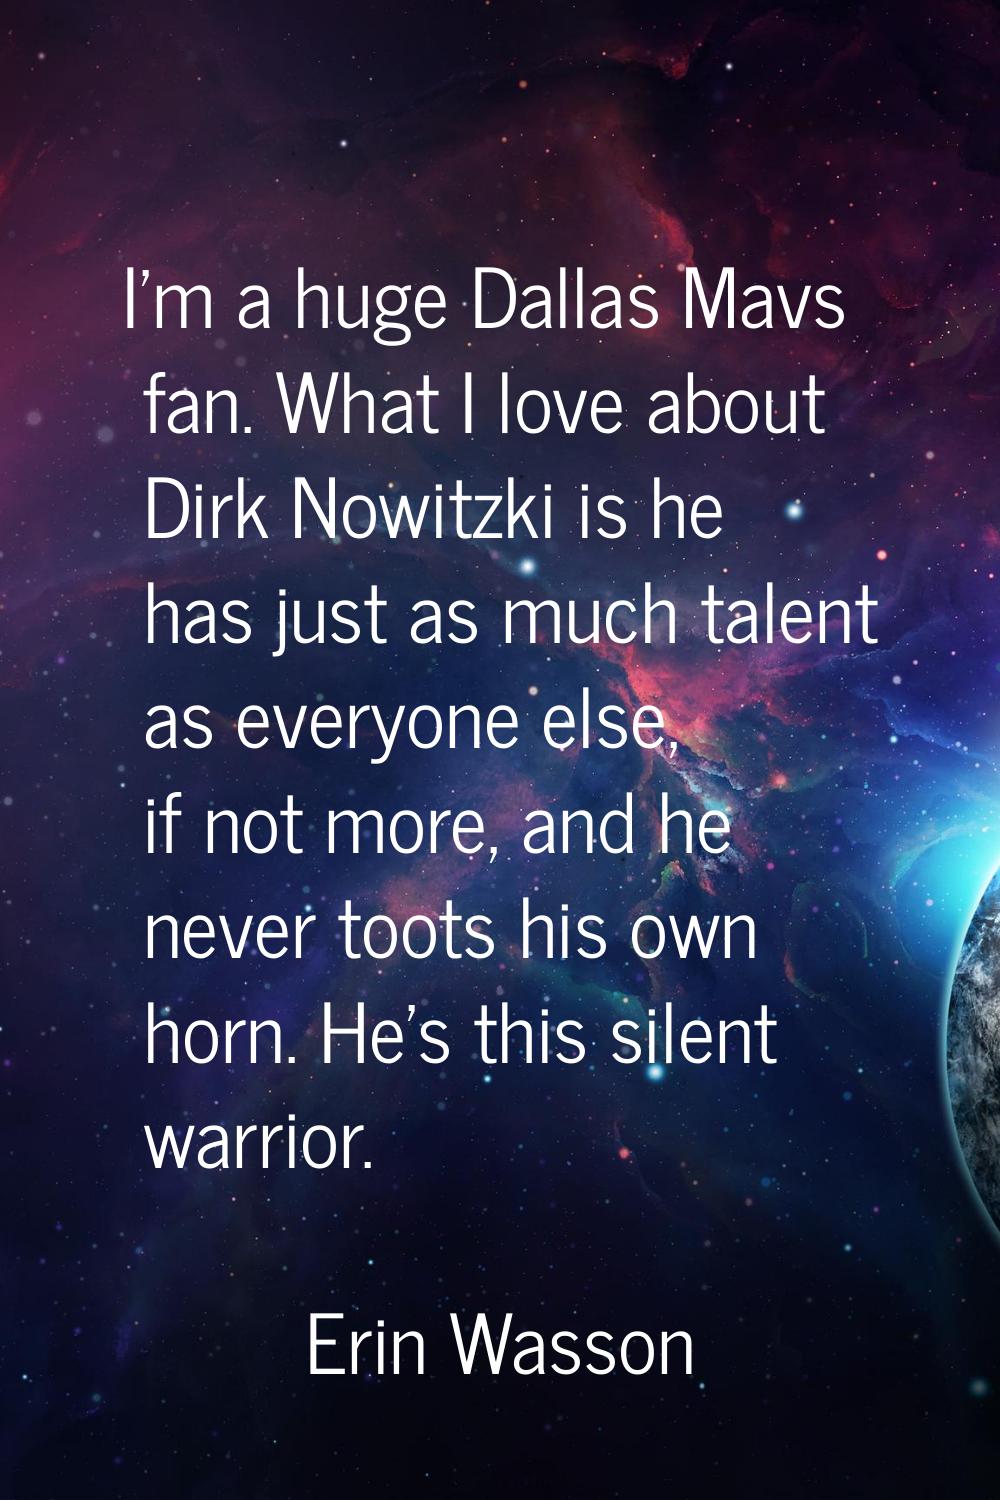 I'm a huge Dallas Mavs fan. What I love about Dirk Nowitzki is he has just as much talent as everyo